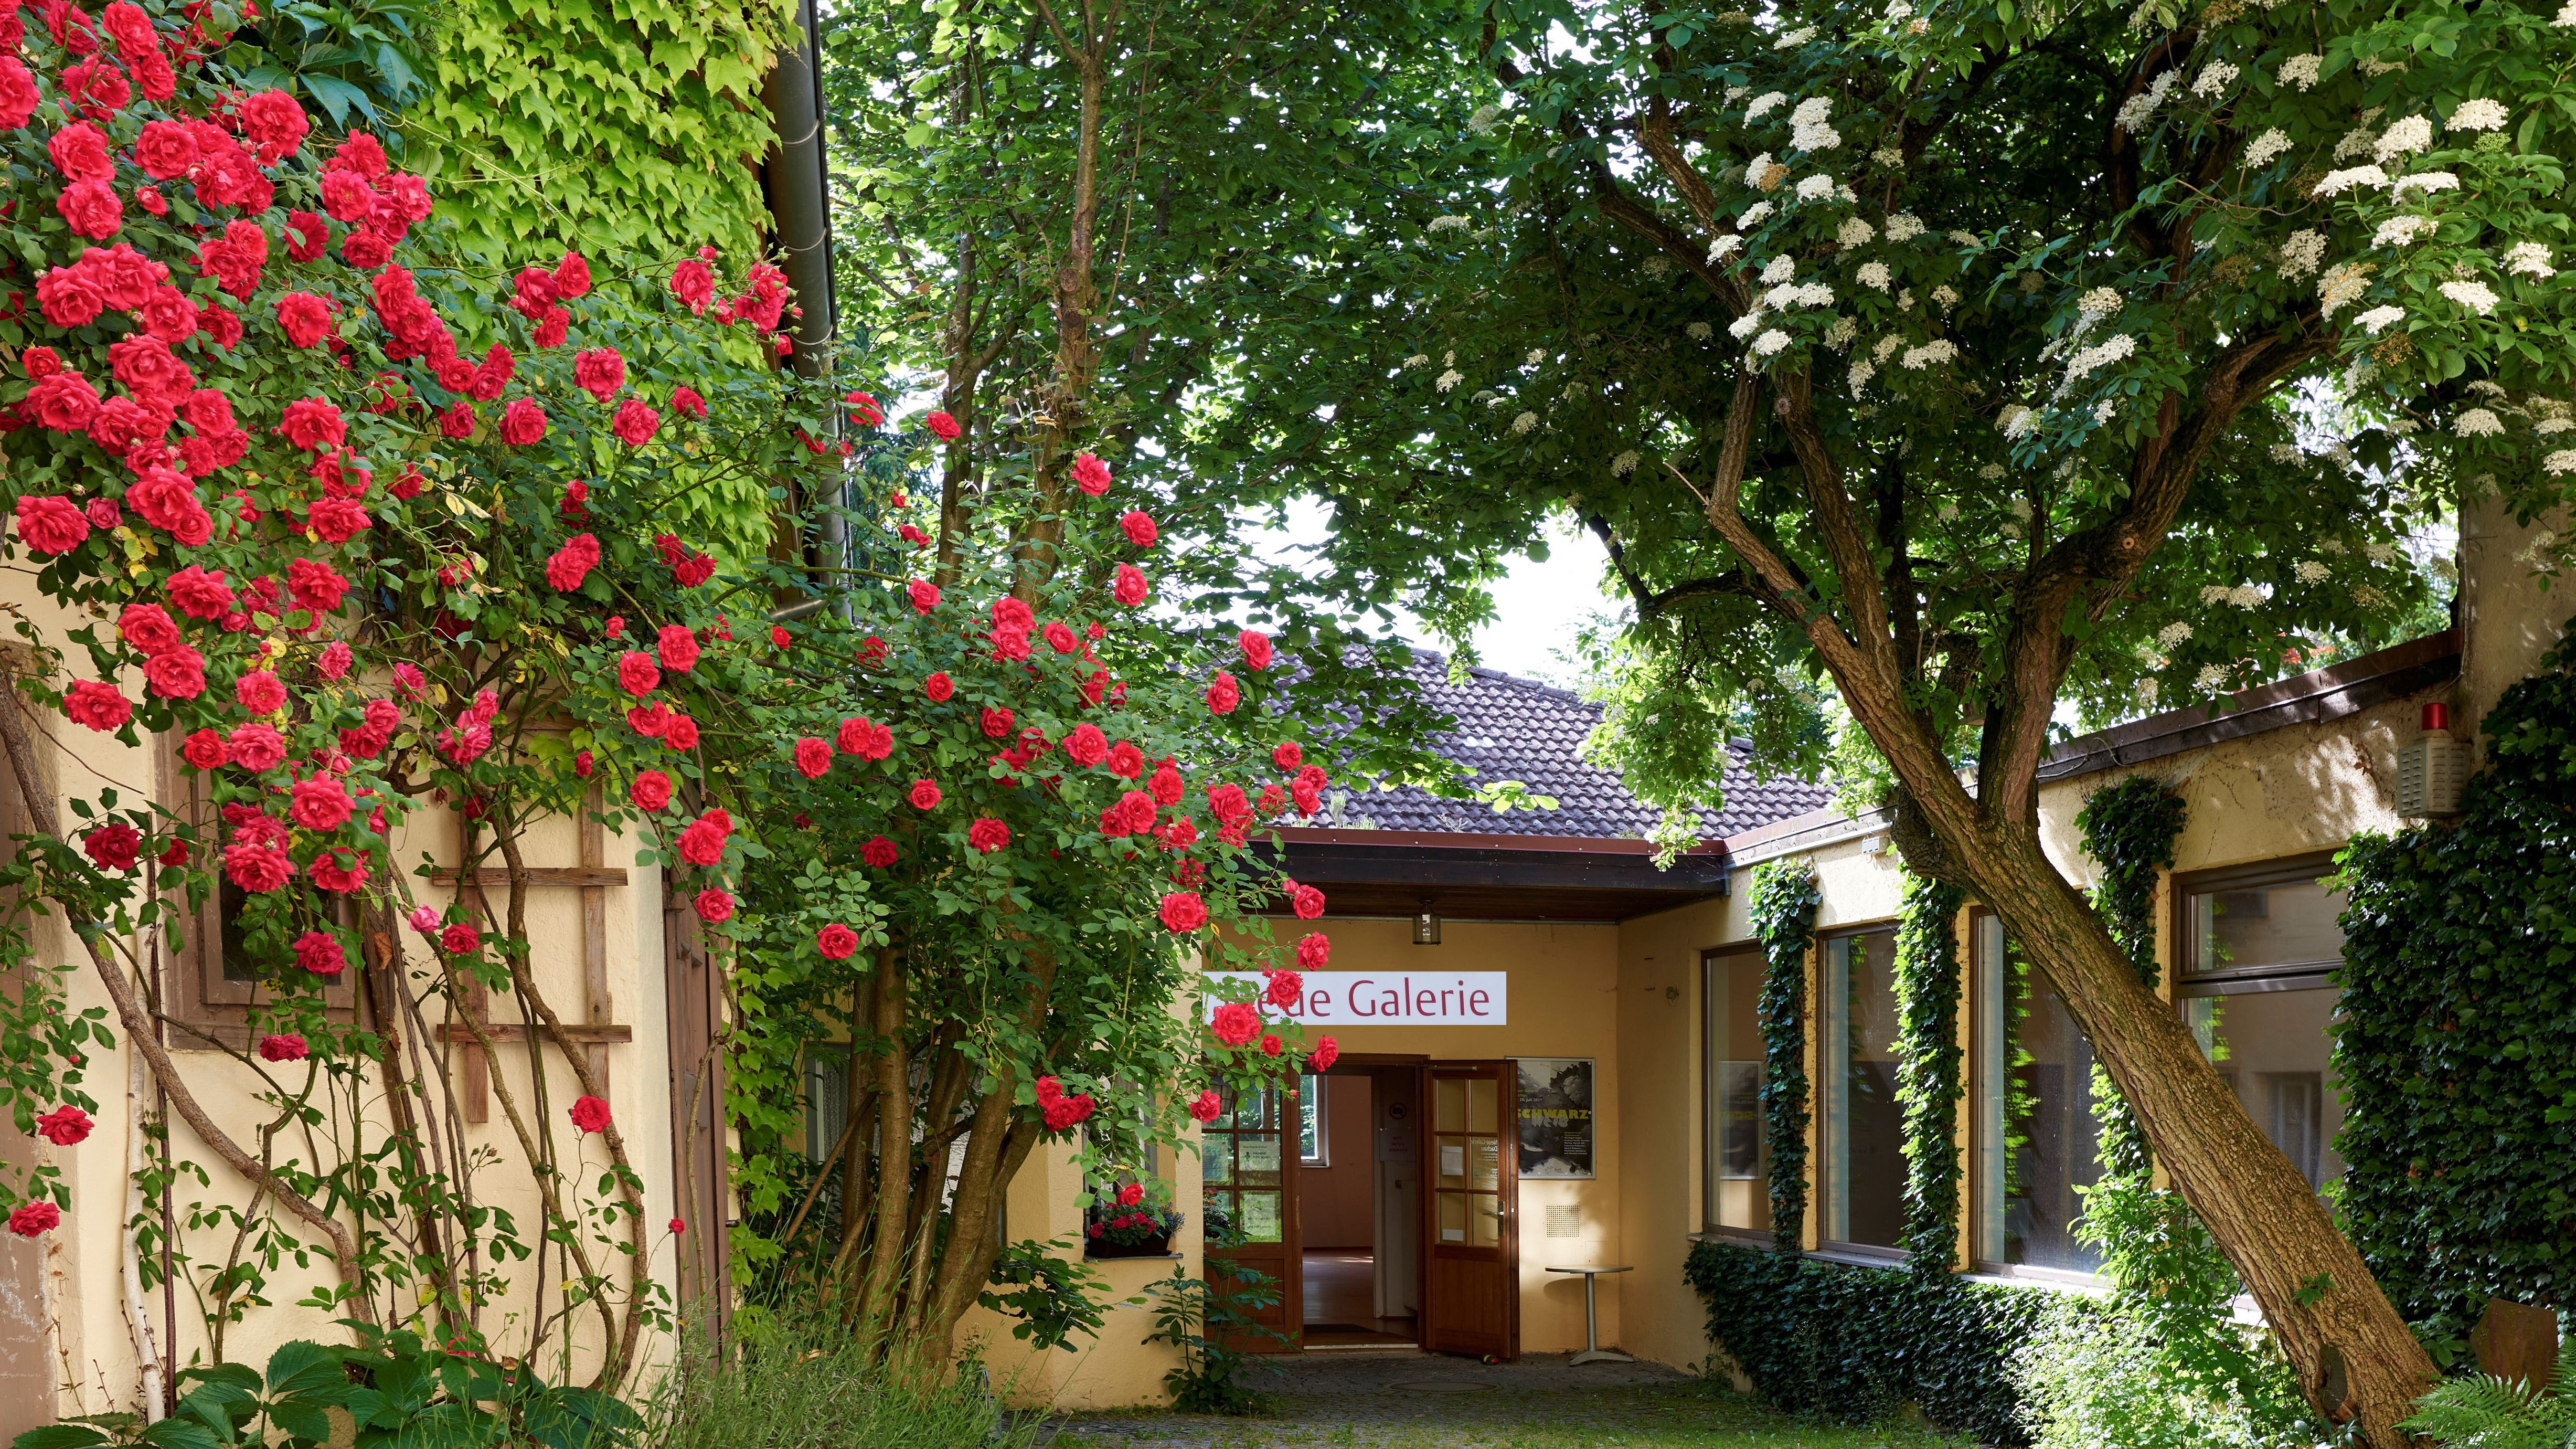 View of the inner courtyard of Neue Galerie (galery of contemporary art), enclosed by yellow walls with red rambler roses on the left and elderberry in bloom on the right, the door to the gallery in the rear is open. Photo, Zweckverband Dachauer Galerien und Museen, Jürgen Hartmann Dachau